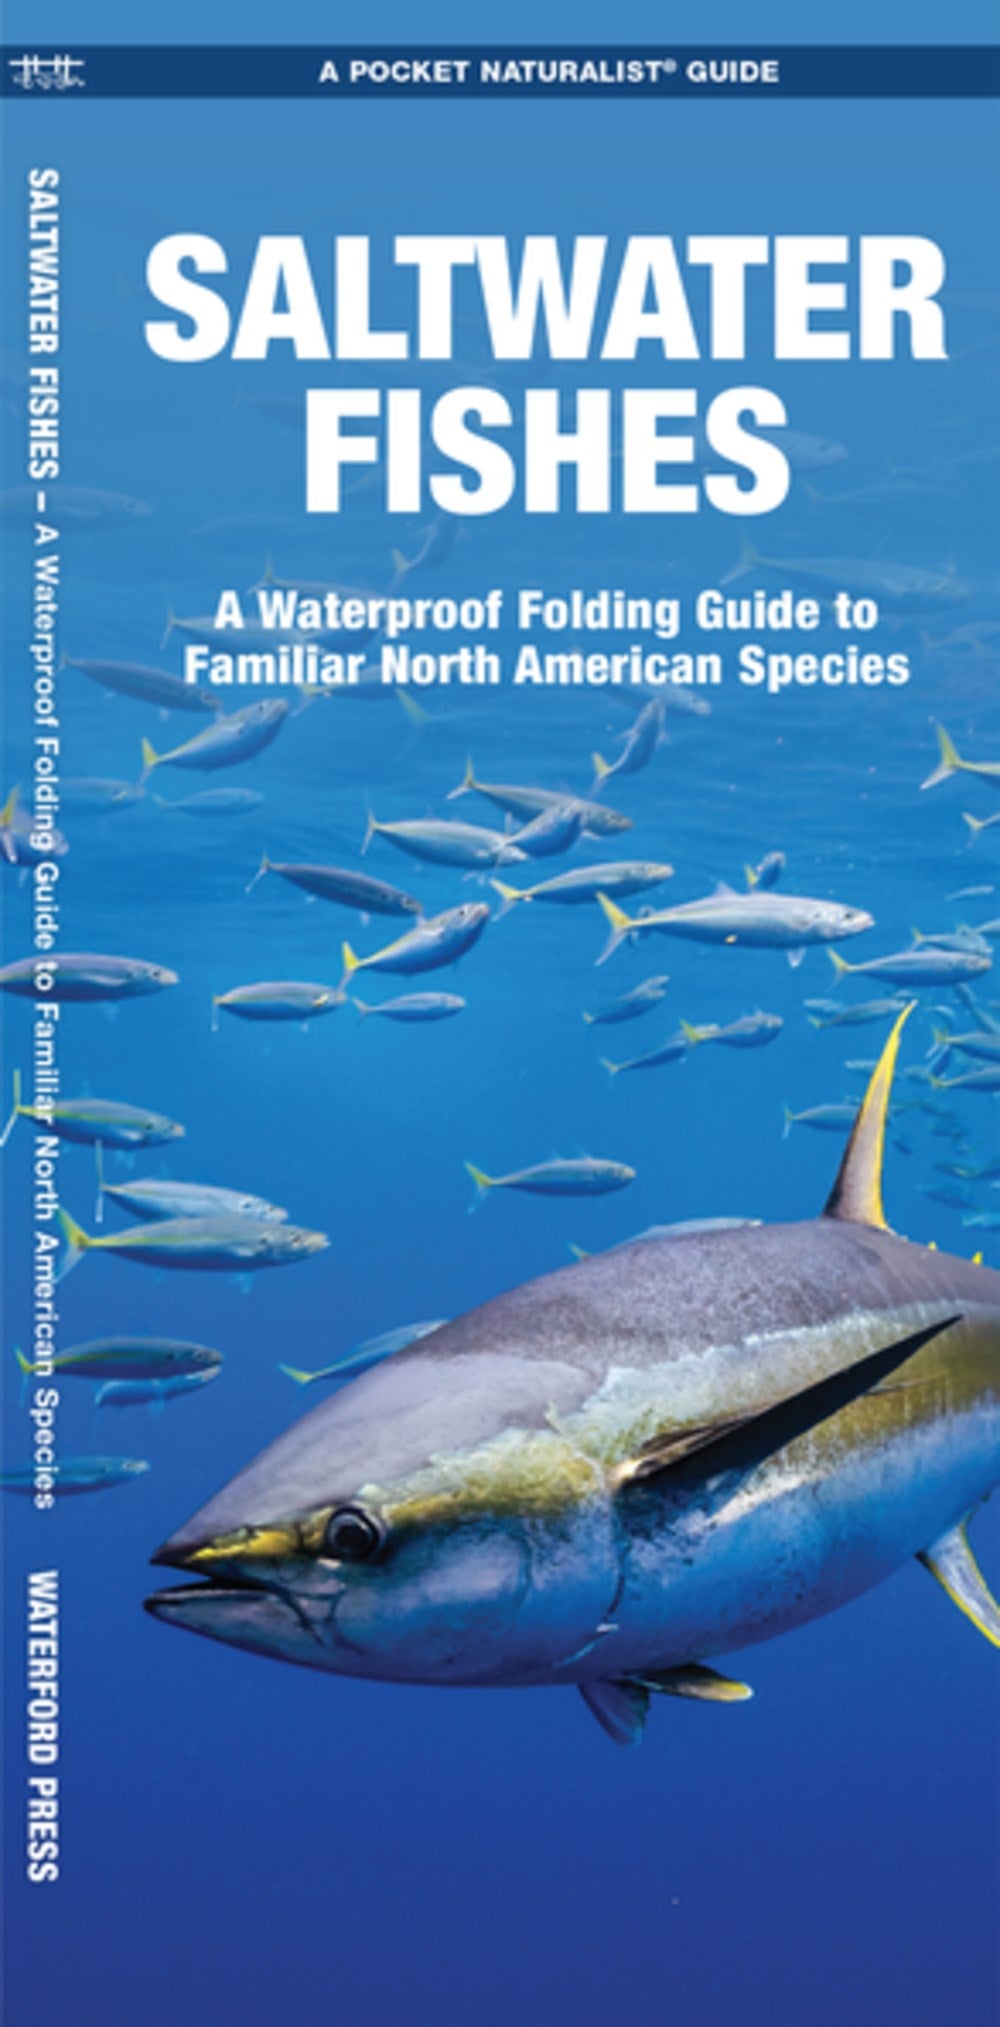 Saltwater Fishes: A Waterproof Folding Guide to Familiar North American Species (2nd Edition)